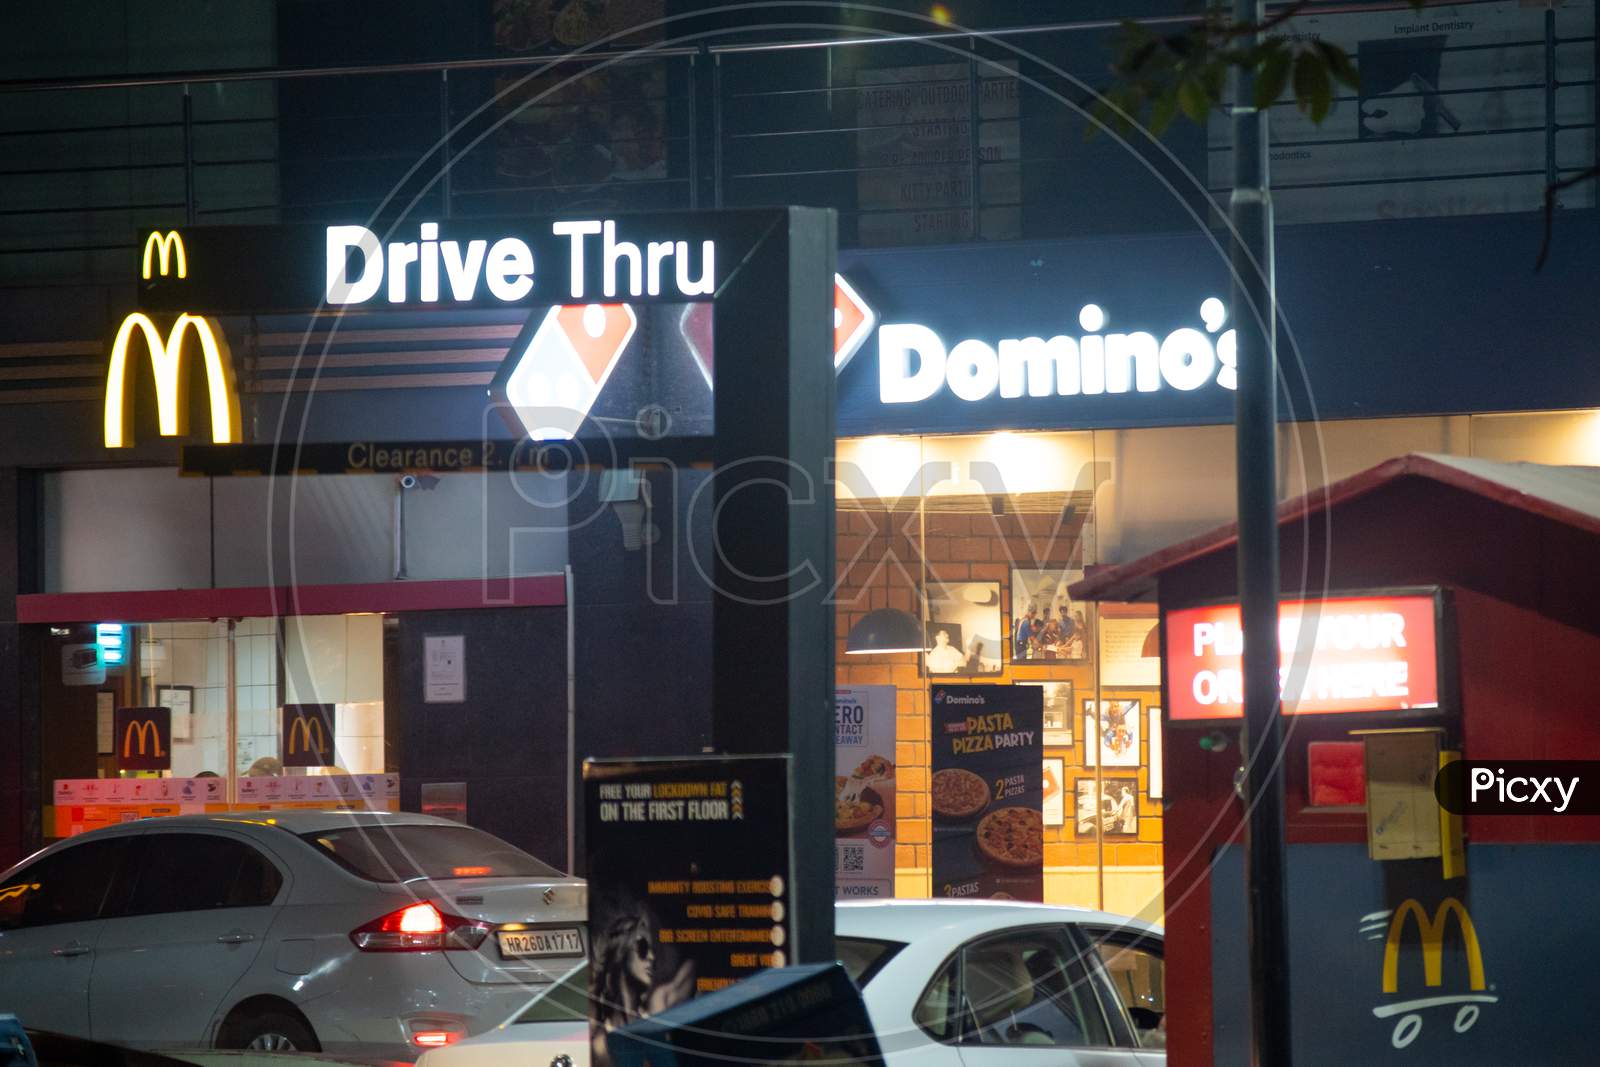 Lit Signboard For A Dominoes And Mcdonalds On A Busy Indian Street With Cars Lining Up For Takeaway From The Fast Food Quick Service Restaurant